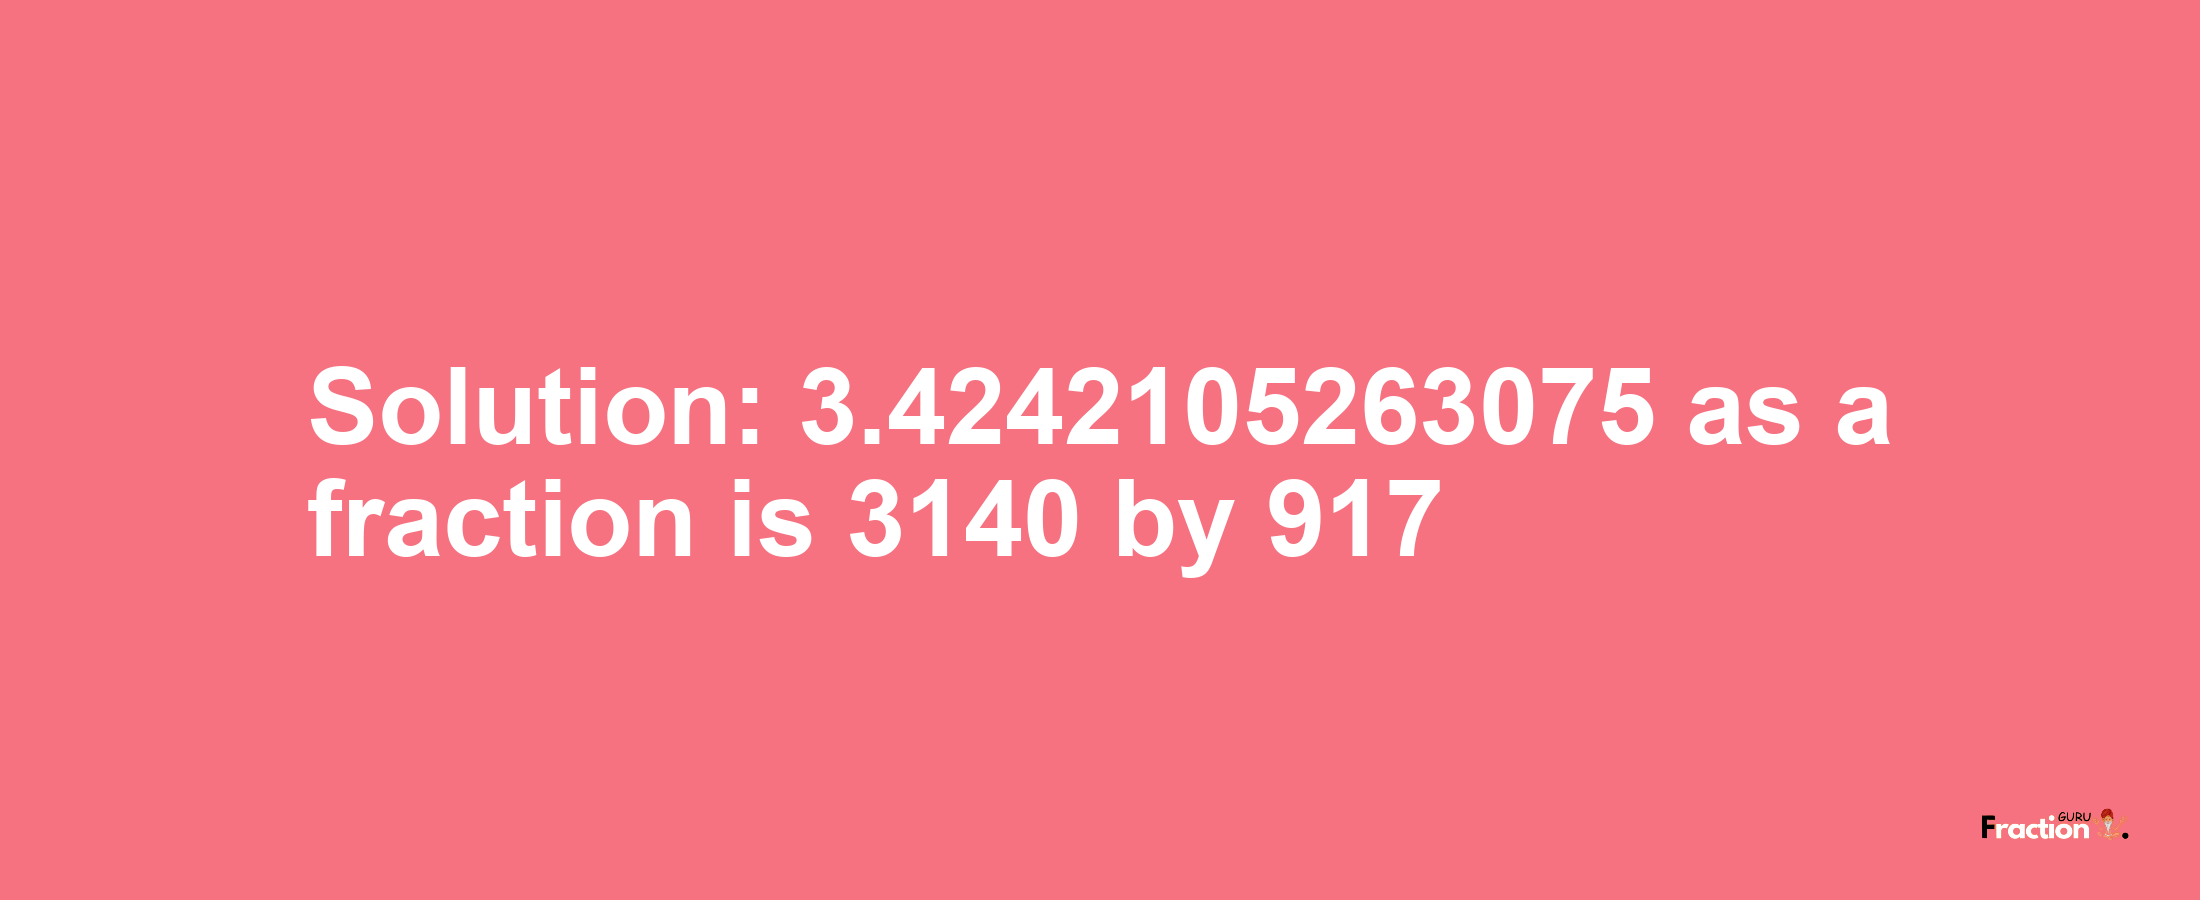 Solution:3.4242105263075 as a fraction is 3140/917